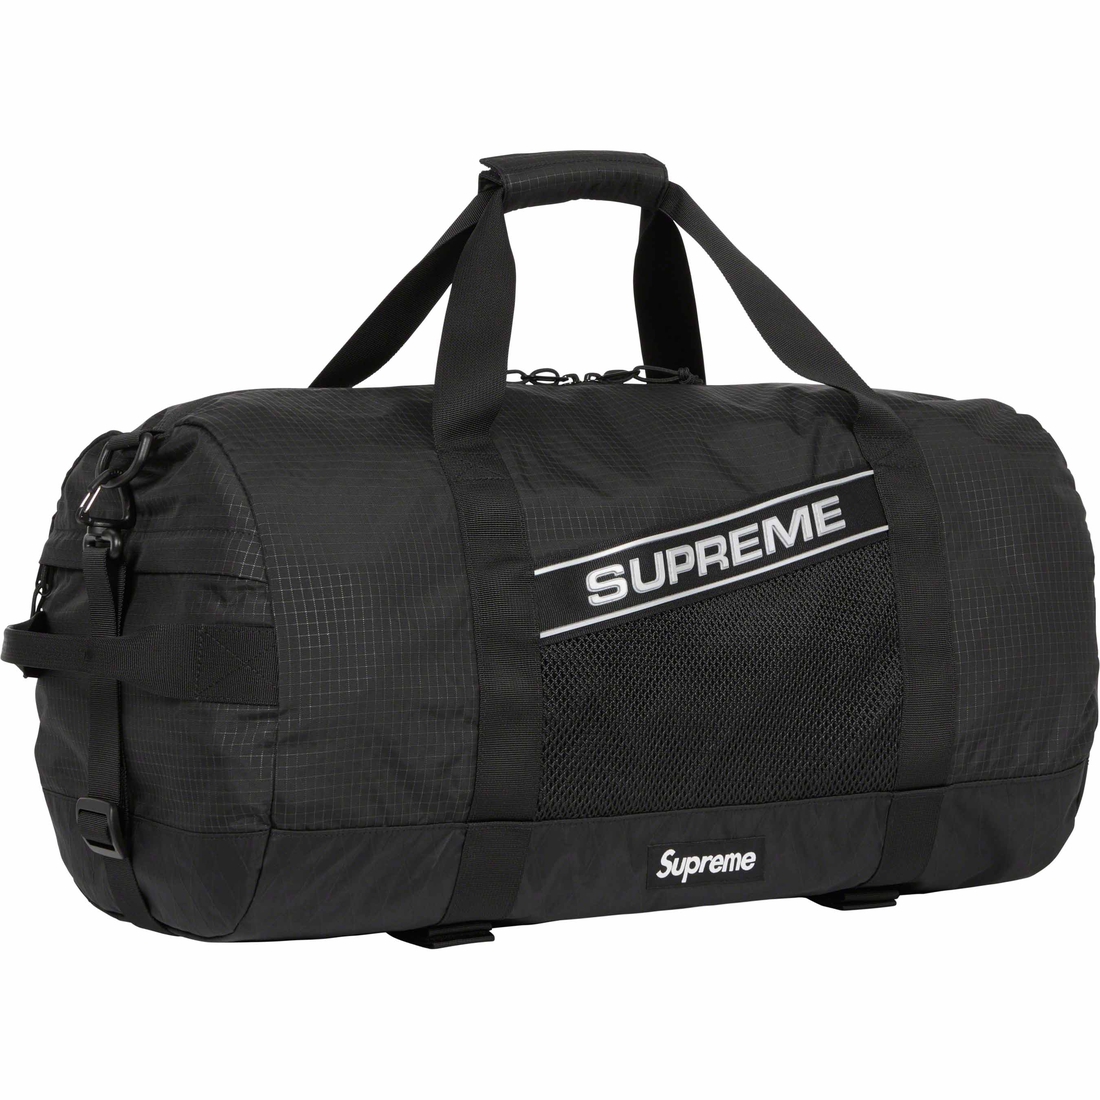 How To Know If Your Supreme Bag Is Real (2023)